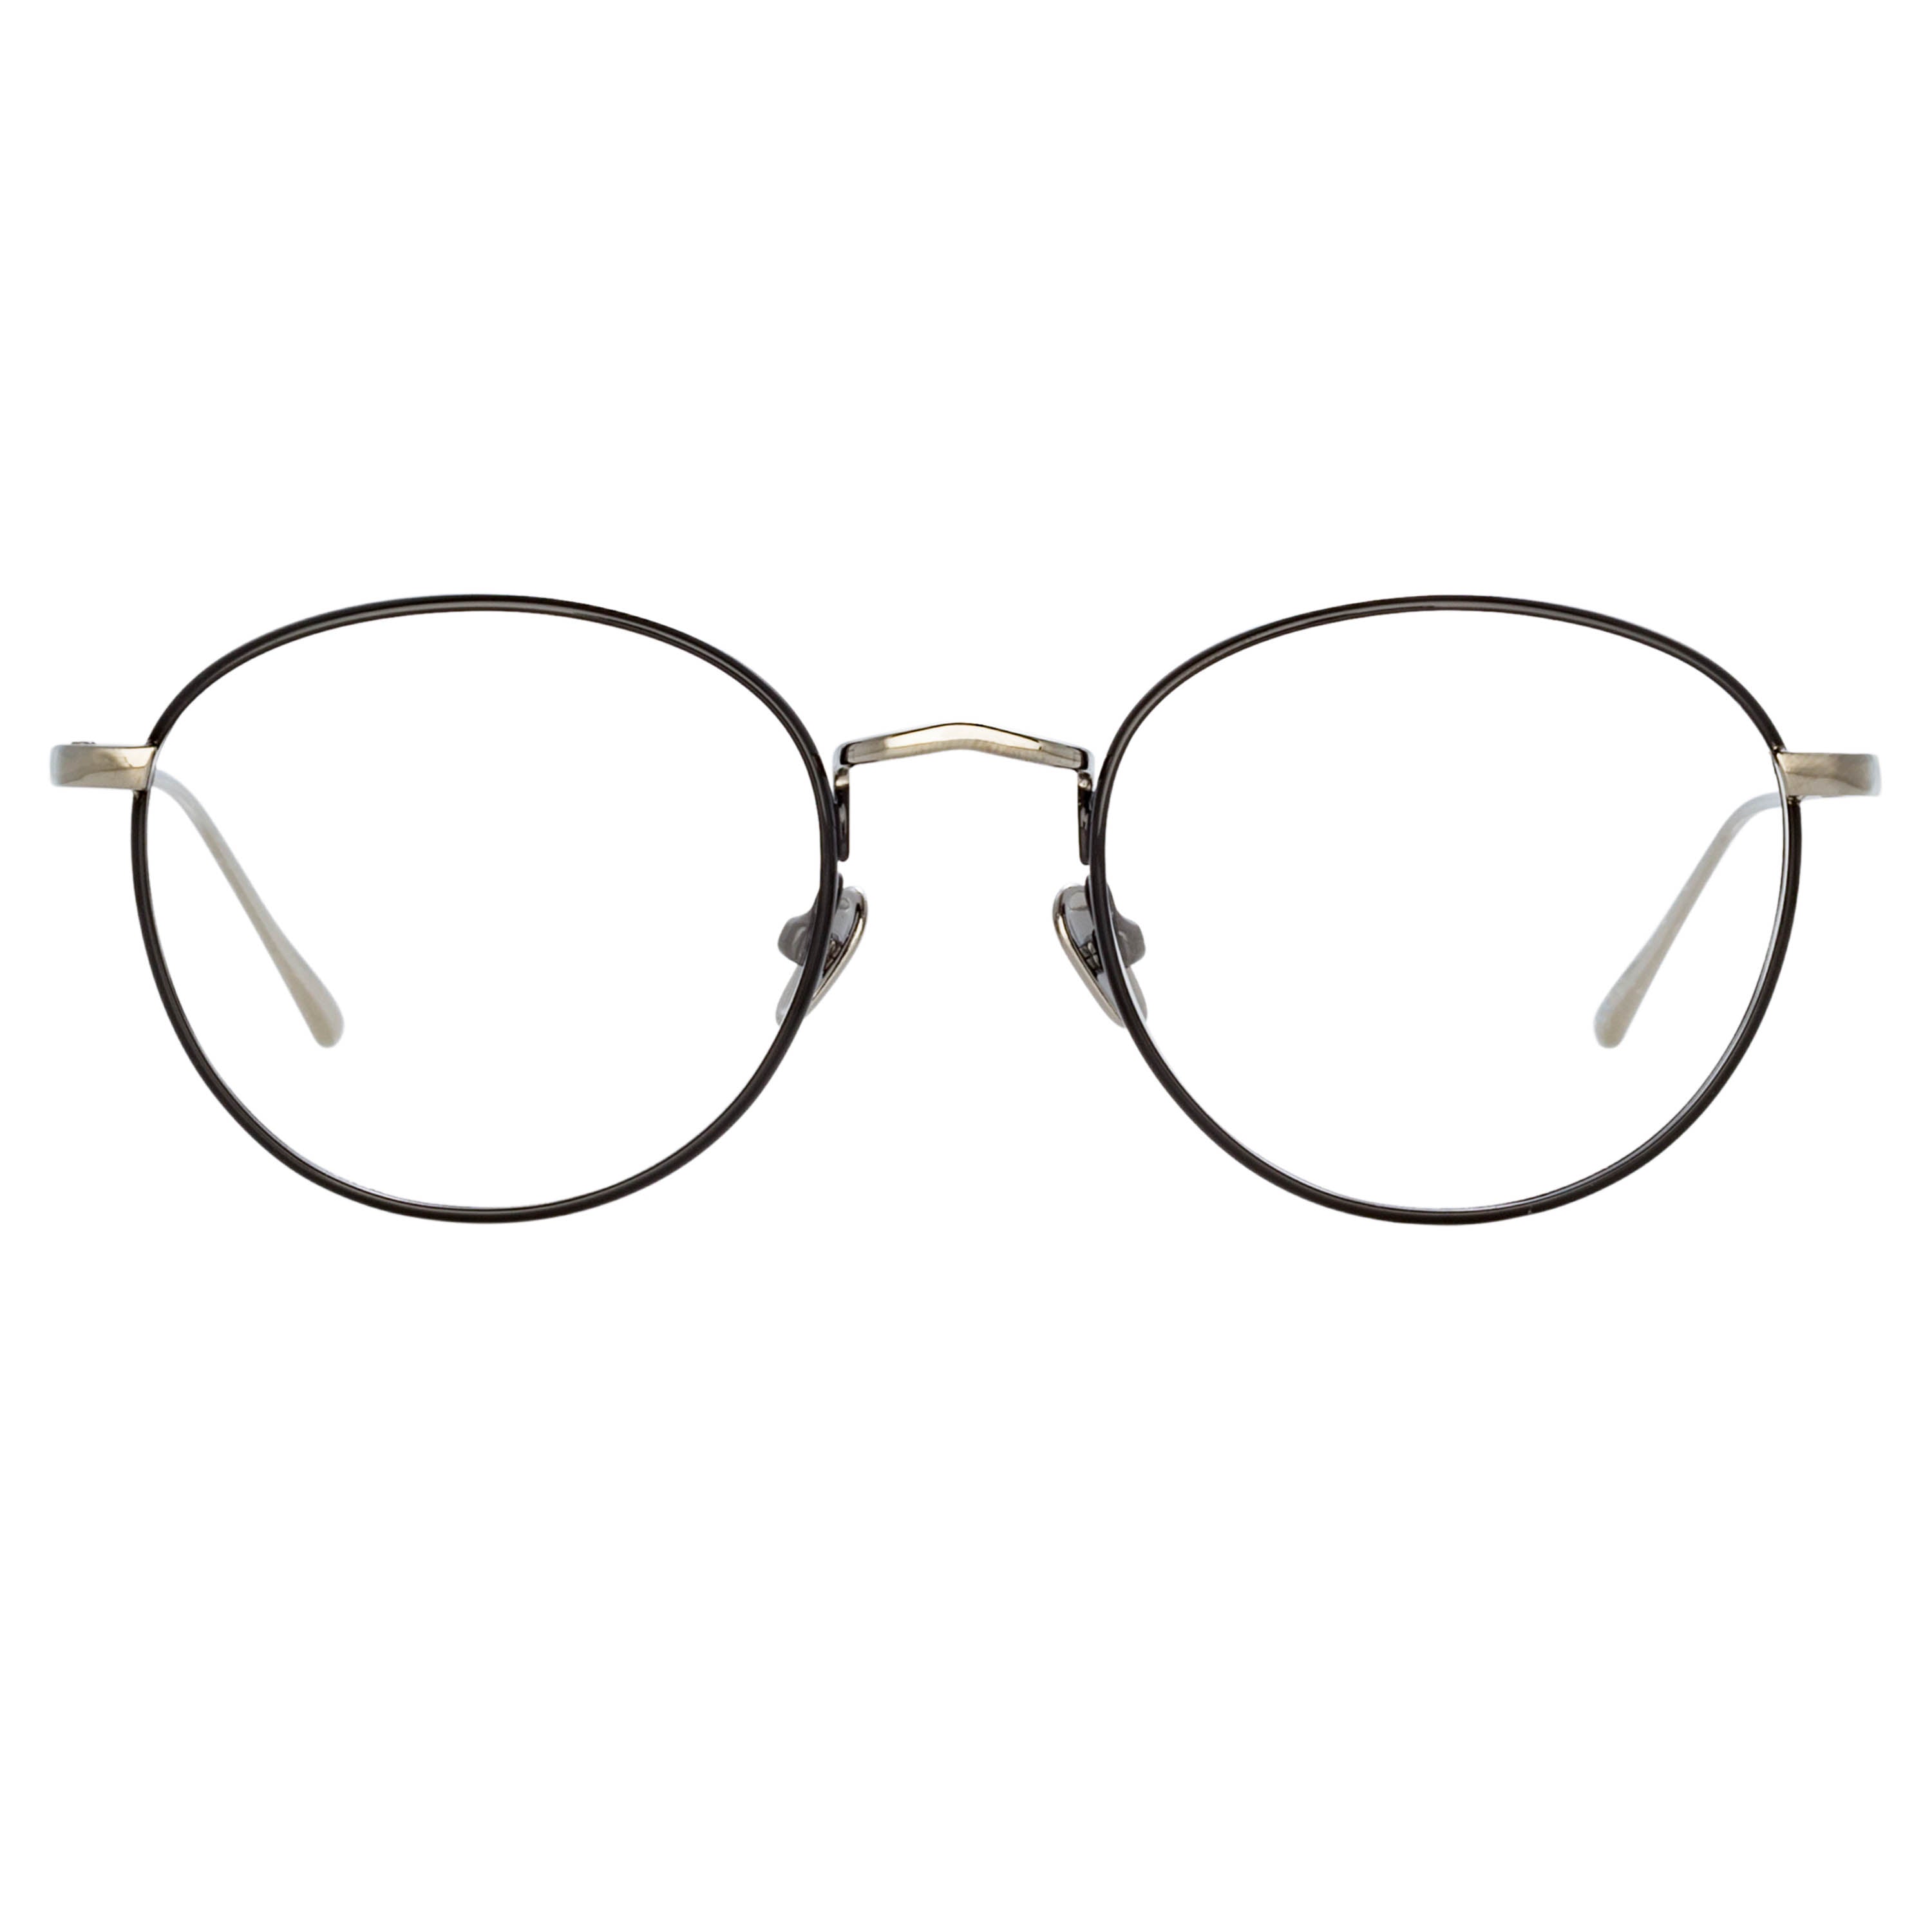 The Harrison Men’s Oval Optical Frame in Black and White Gold (C4)